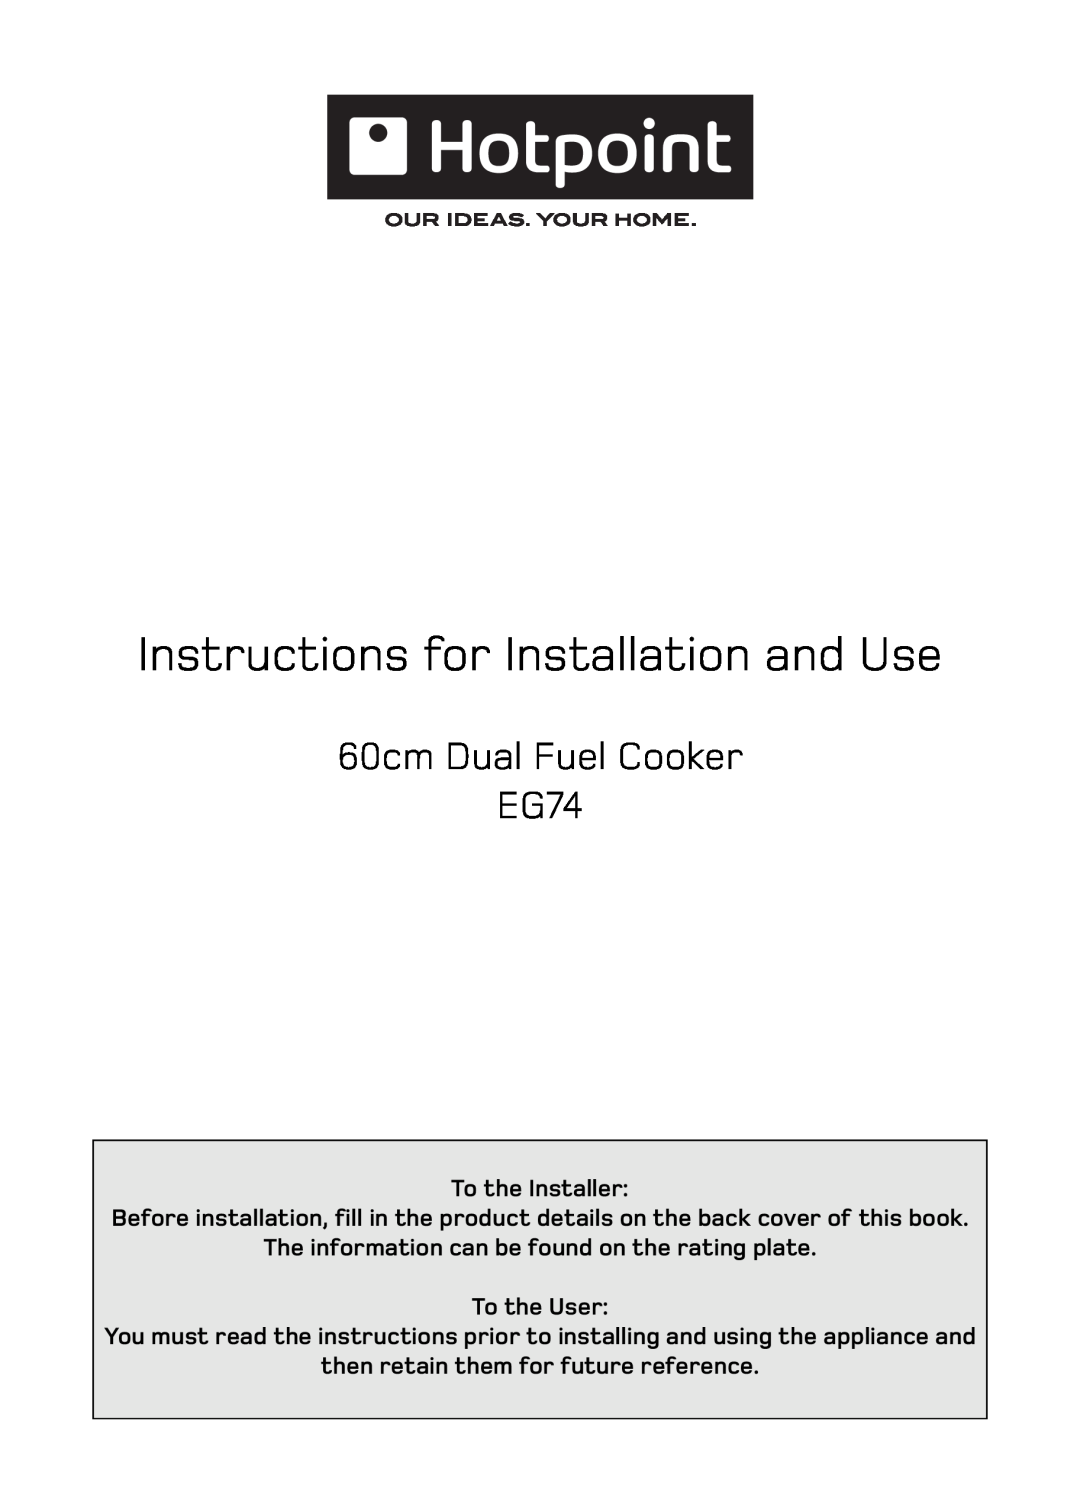 Hotpoint EG74 manual To the Installer, The information can be found on the rating plate To the User 